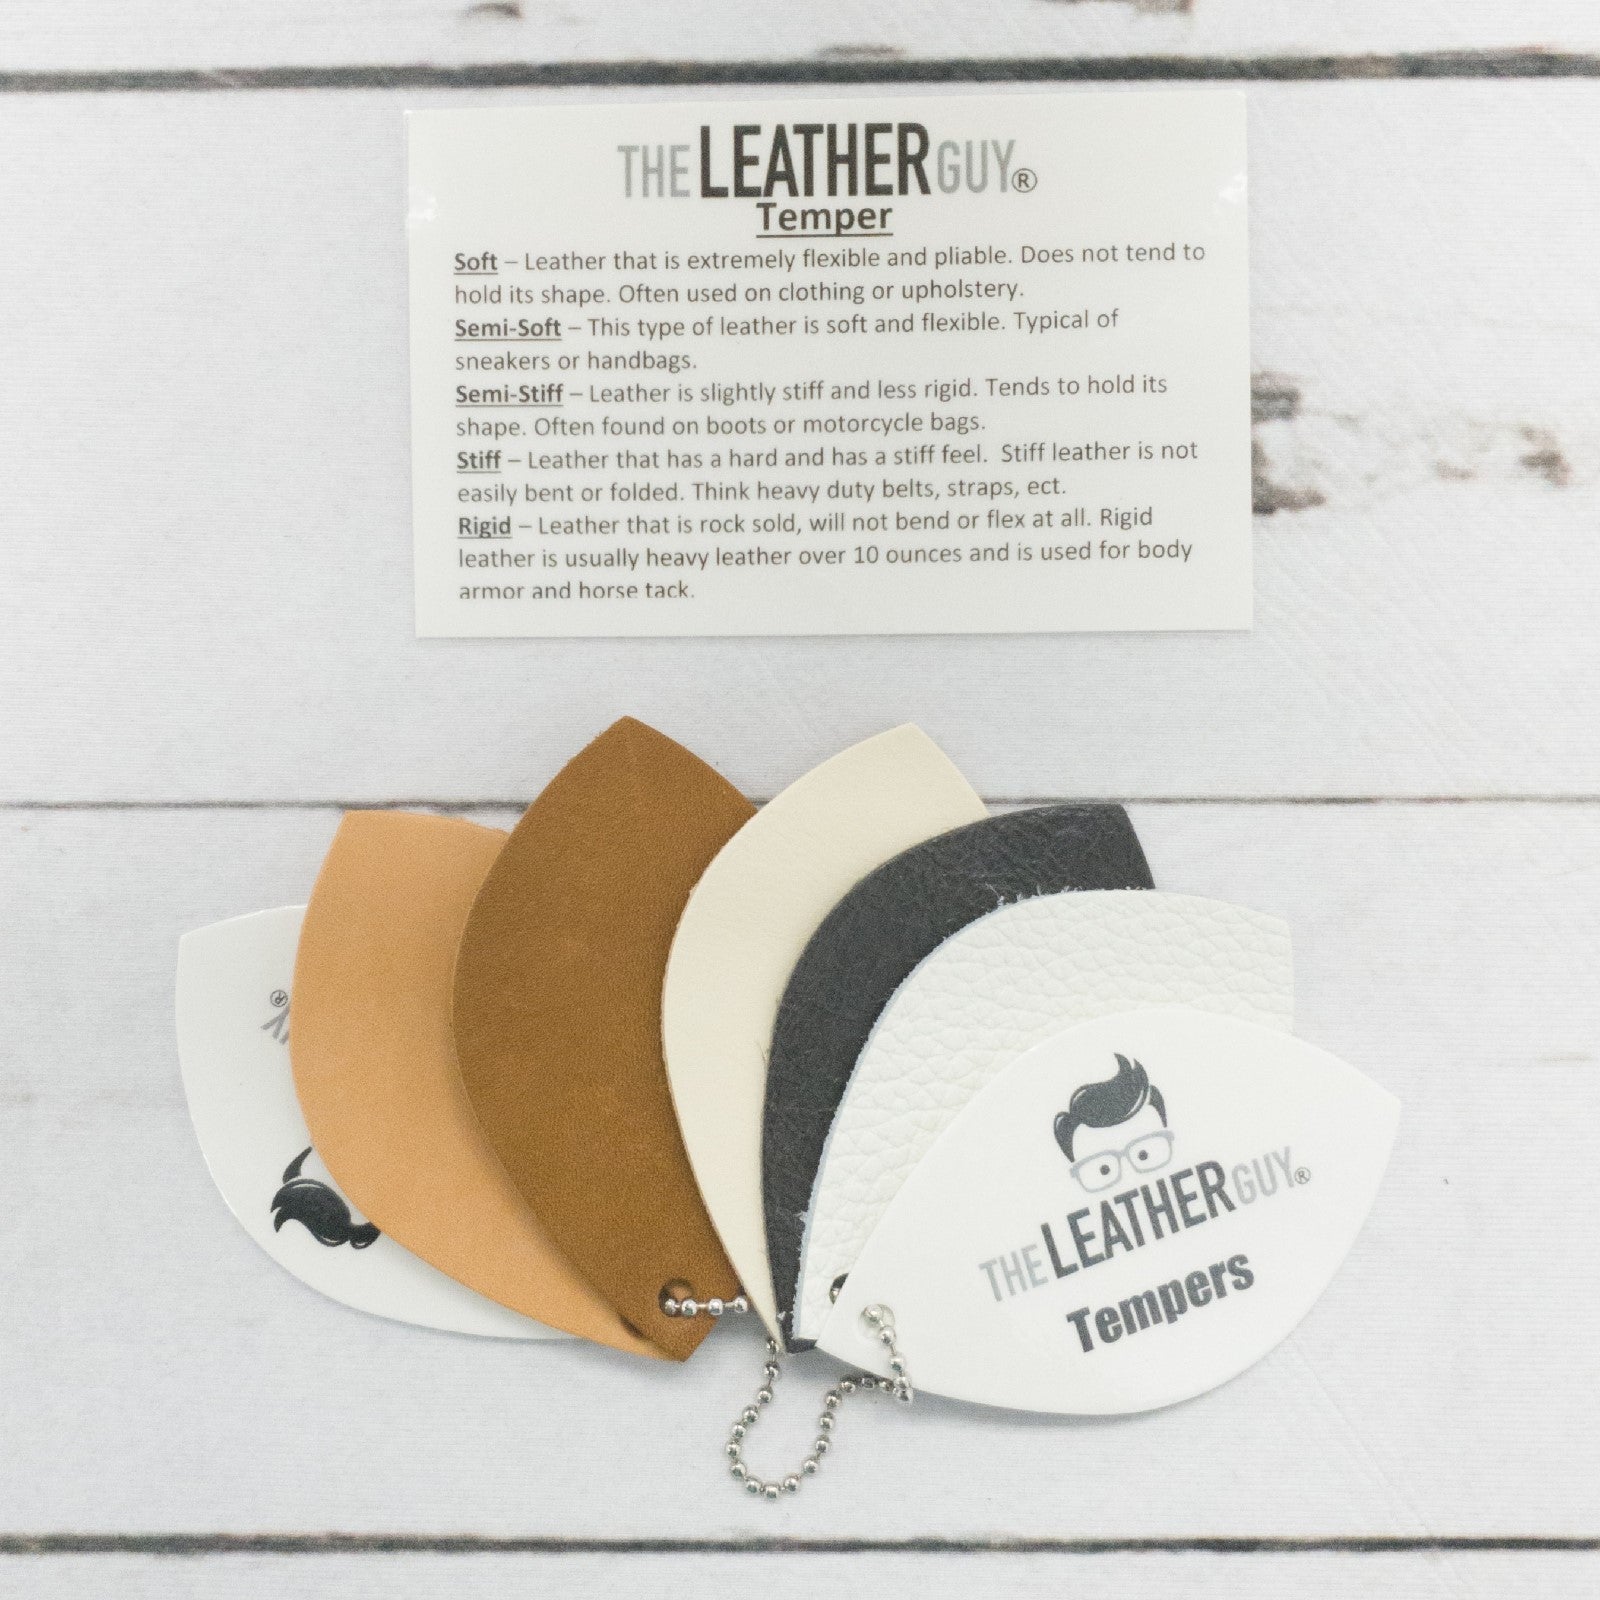 Leather Reference Sample Ring Beginner Information, Tempers | The Leather Guy